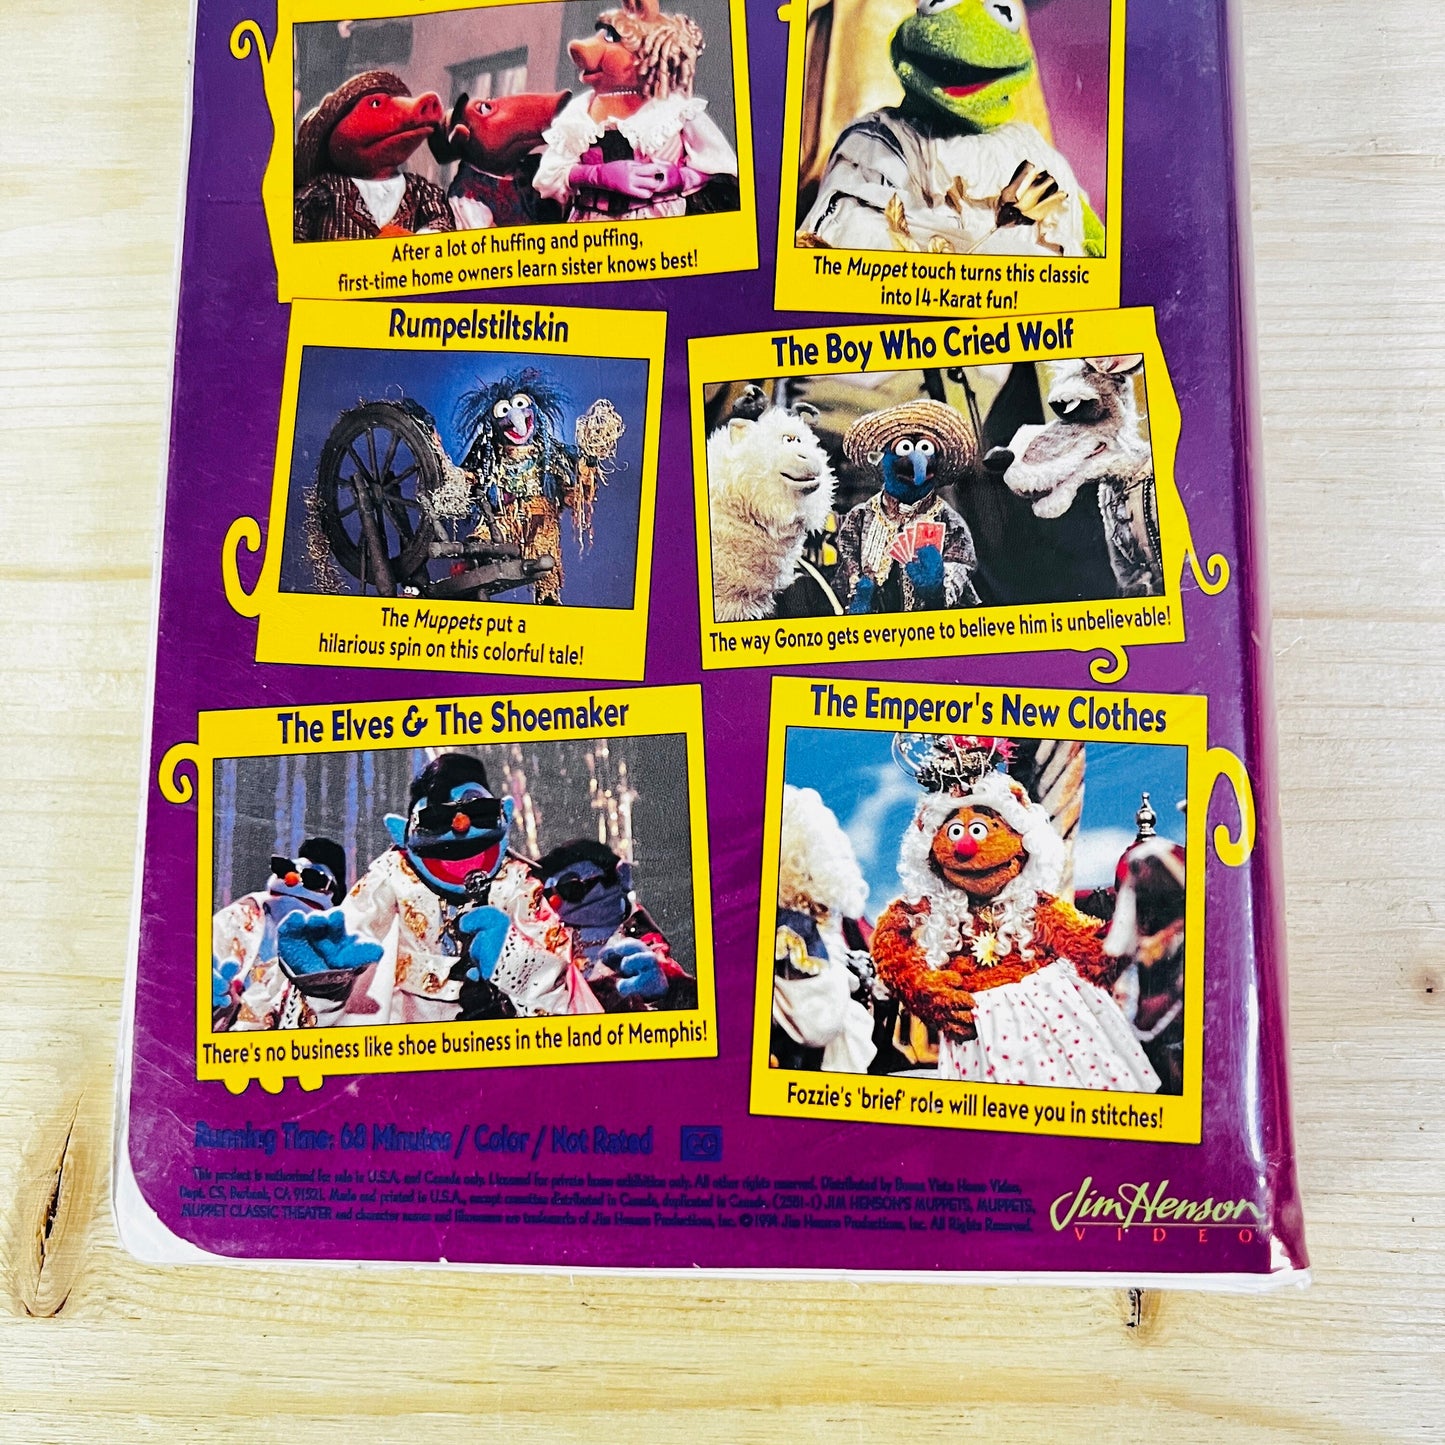 Muppet Classic Theatre VHS Tape